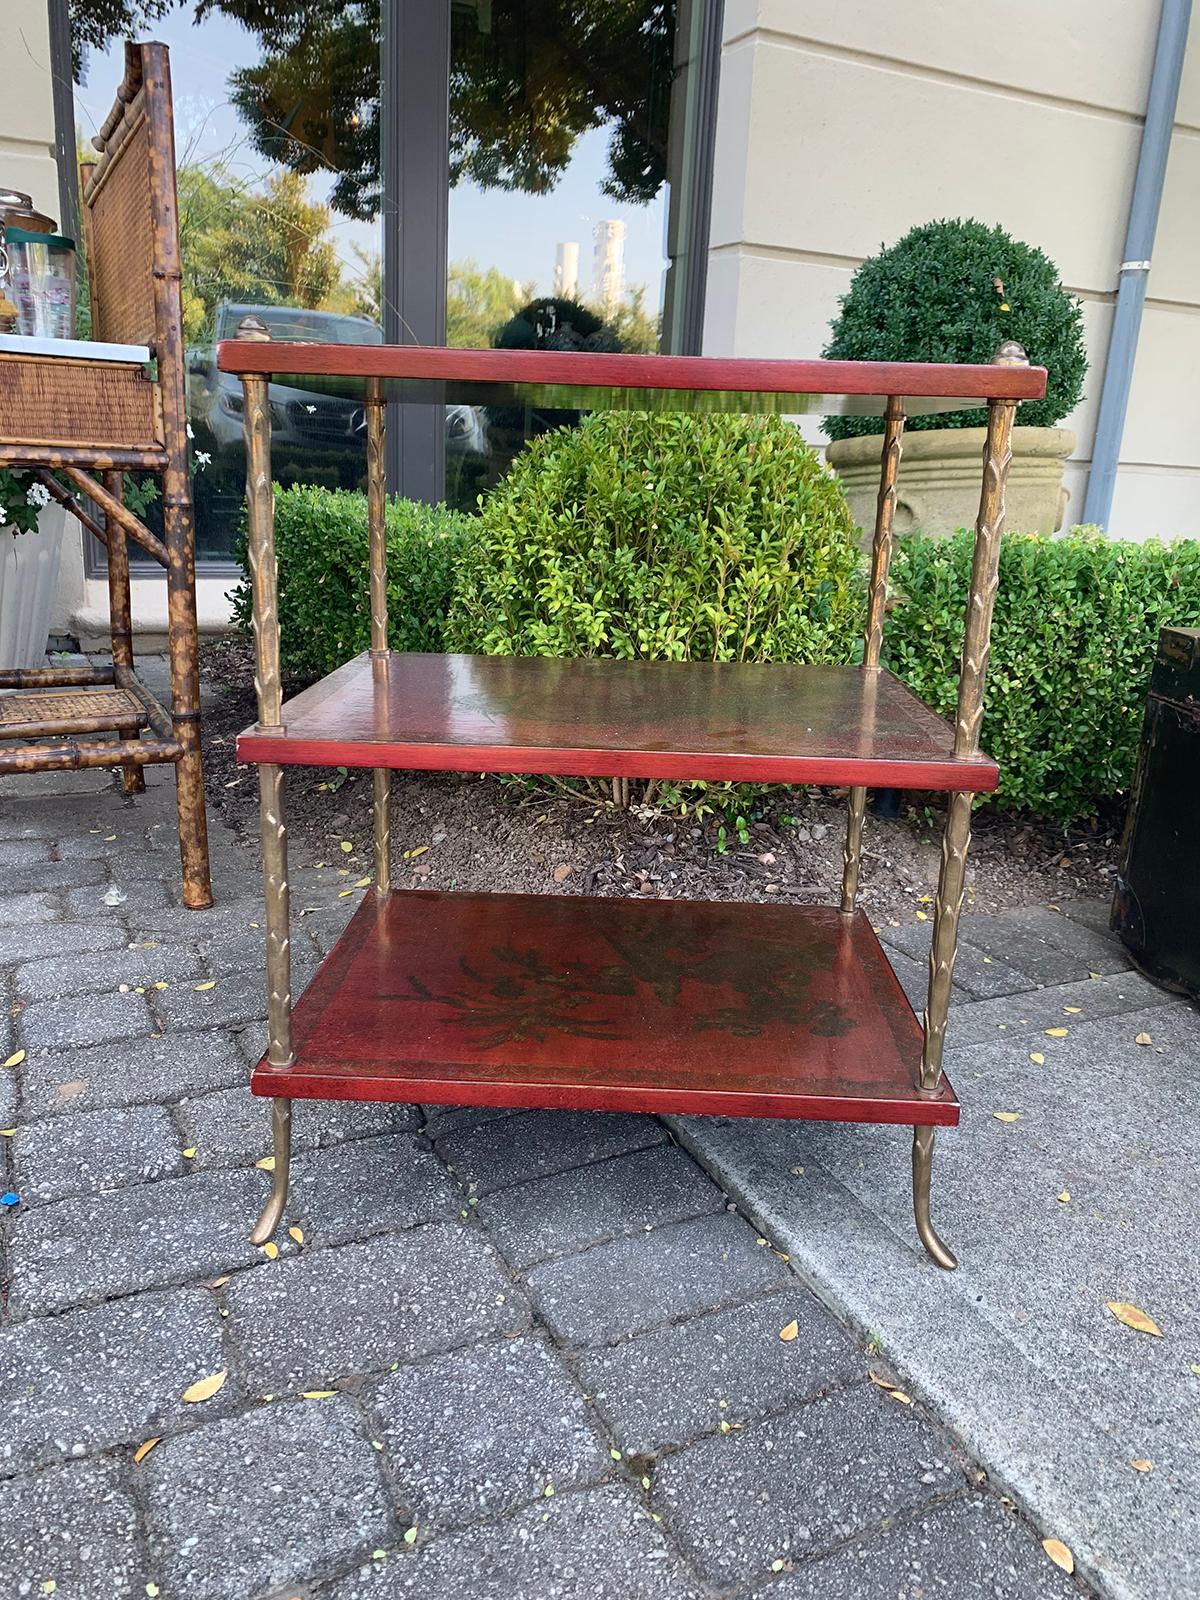 20th century French Maison Jansen style bronze and red chinoiserie three-tier étagère/ side table
legs are bronze palm tree motif.